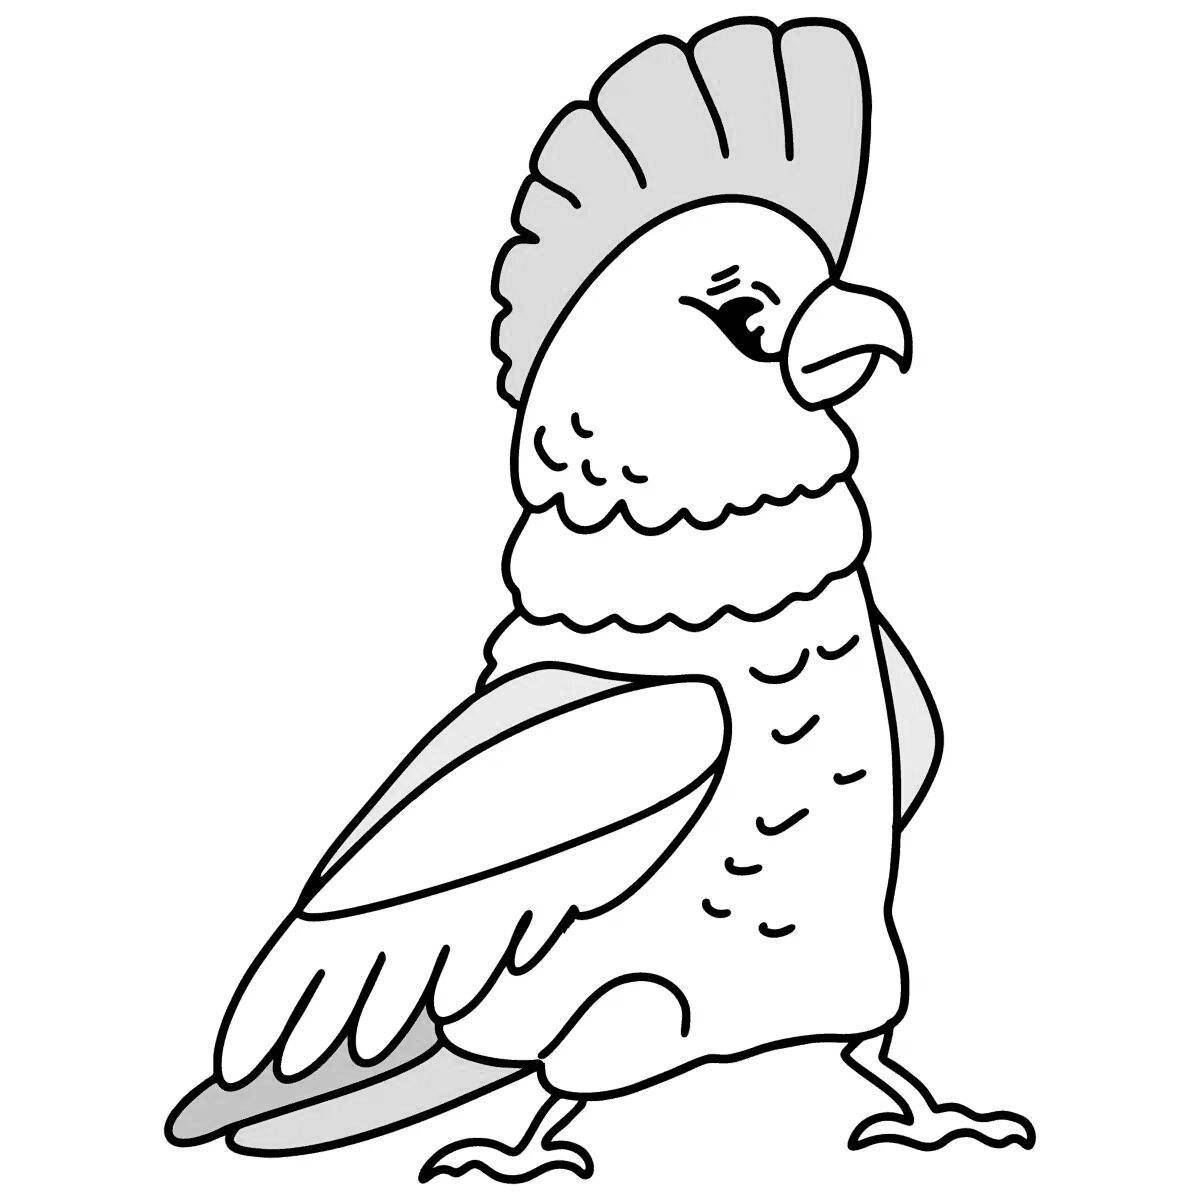 Awesome cockatoo coloring page